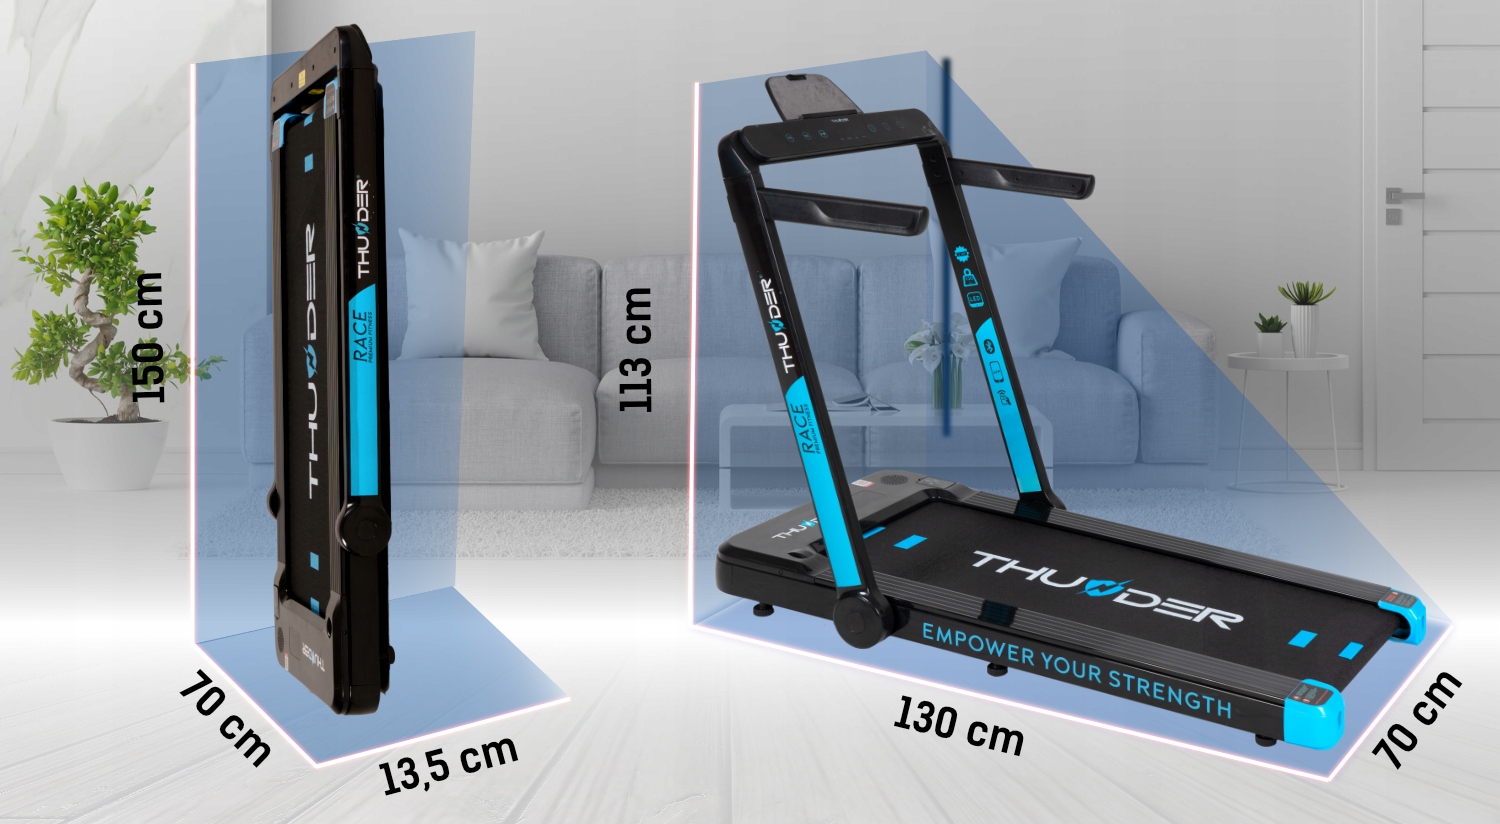 PIONEERING RACE FOLDABLE ELECTRIC TREADMILL 130KG Thunder brand